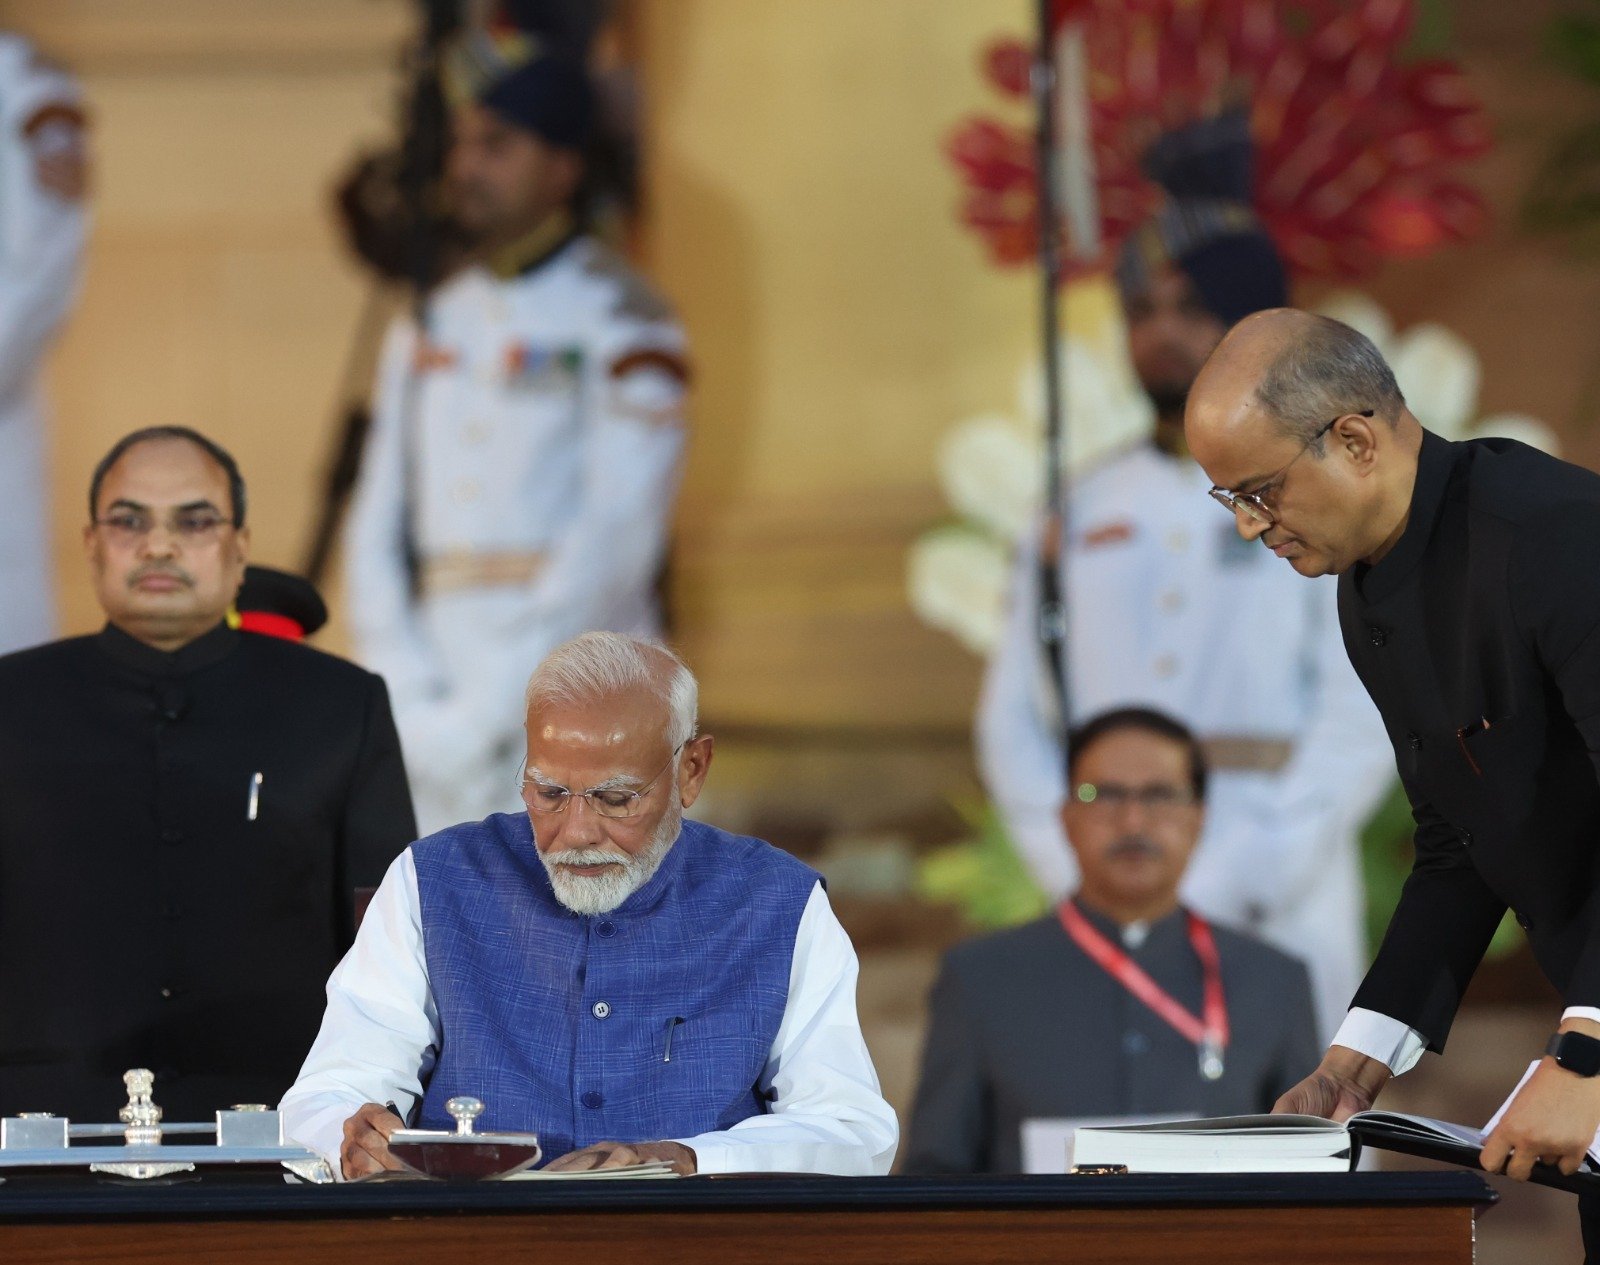 Narendra Modi Makes History by Taking Oath as Prime Minister for the Third Consecutive Term